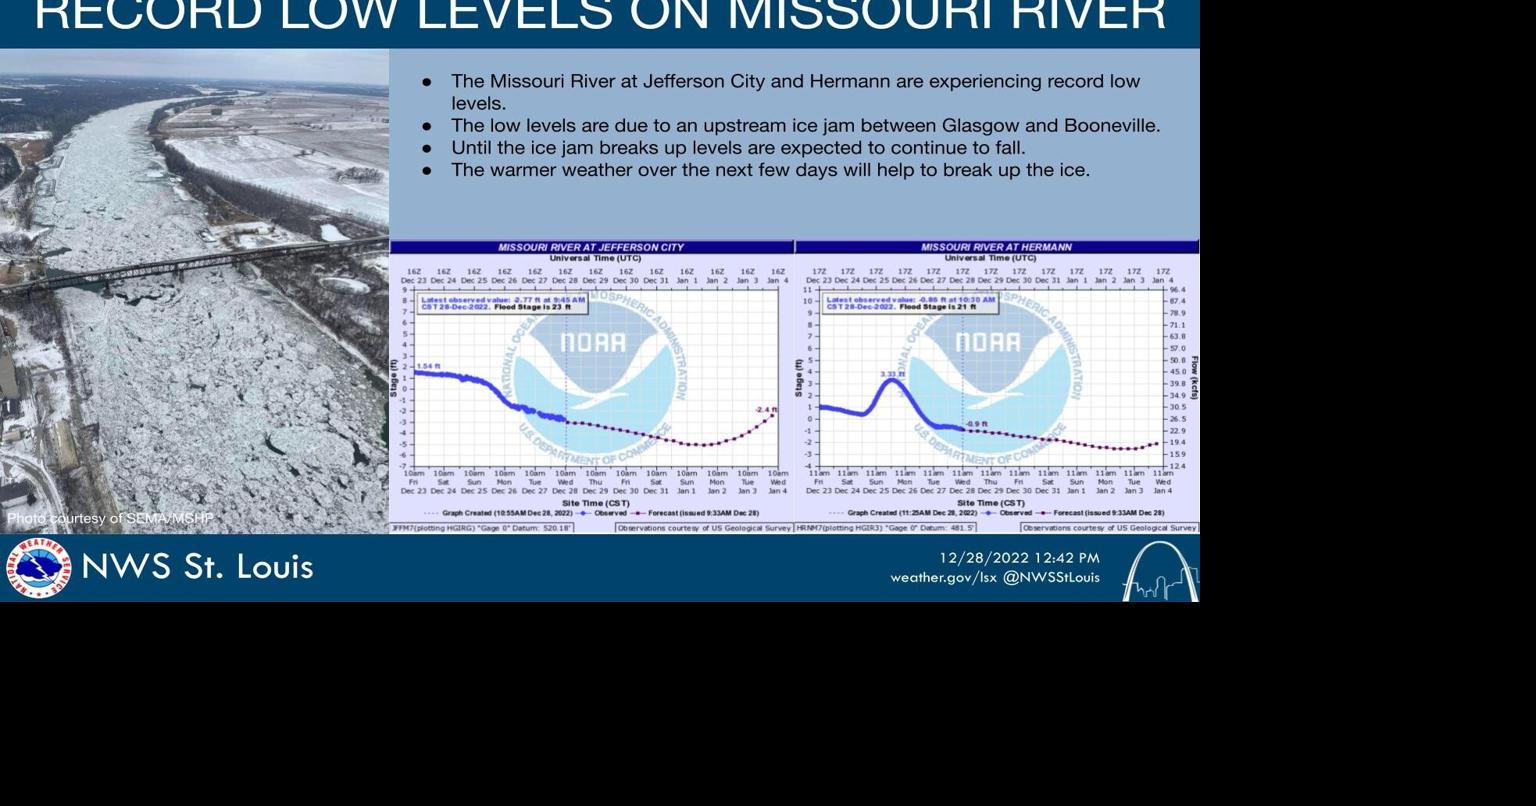 Ice jam on Missouri River causes record-low flows near Jefferson City and Hermann